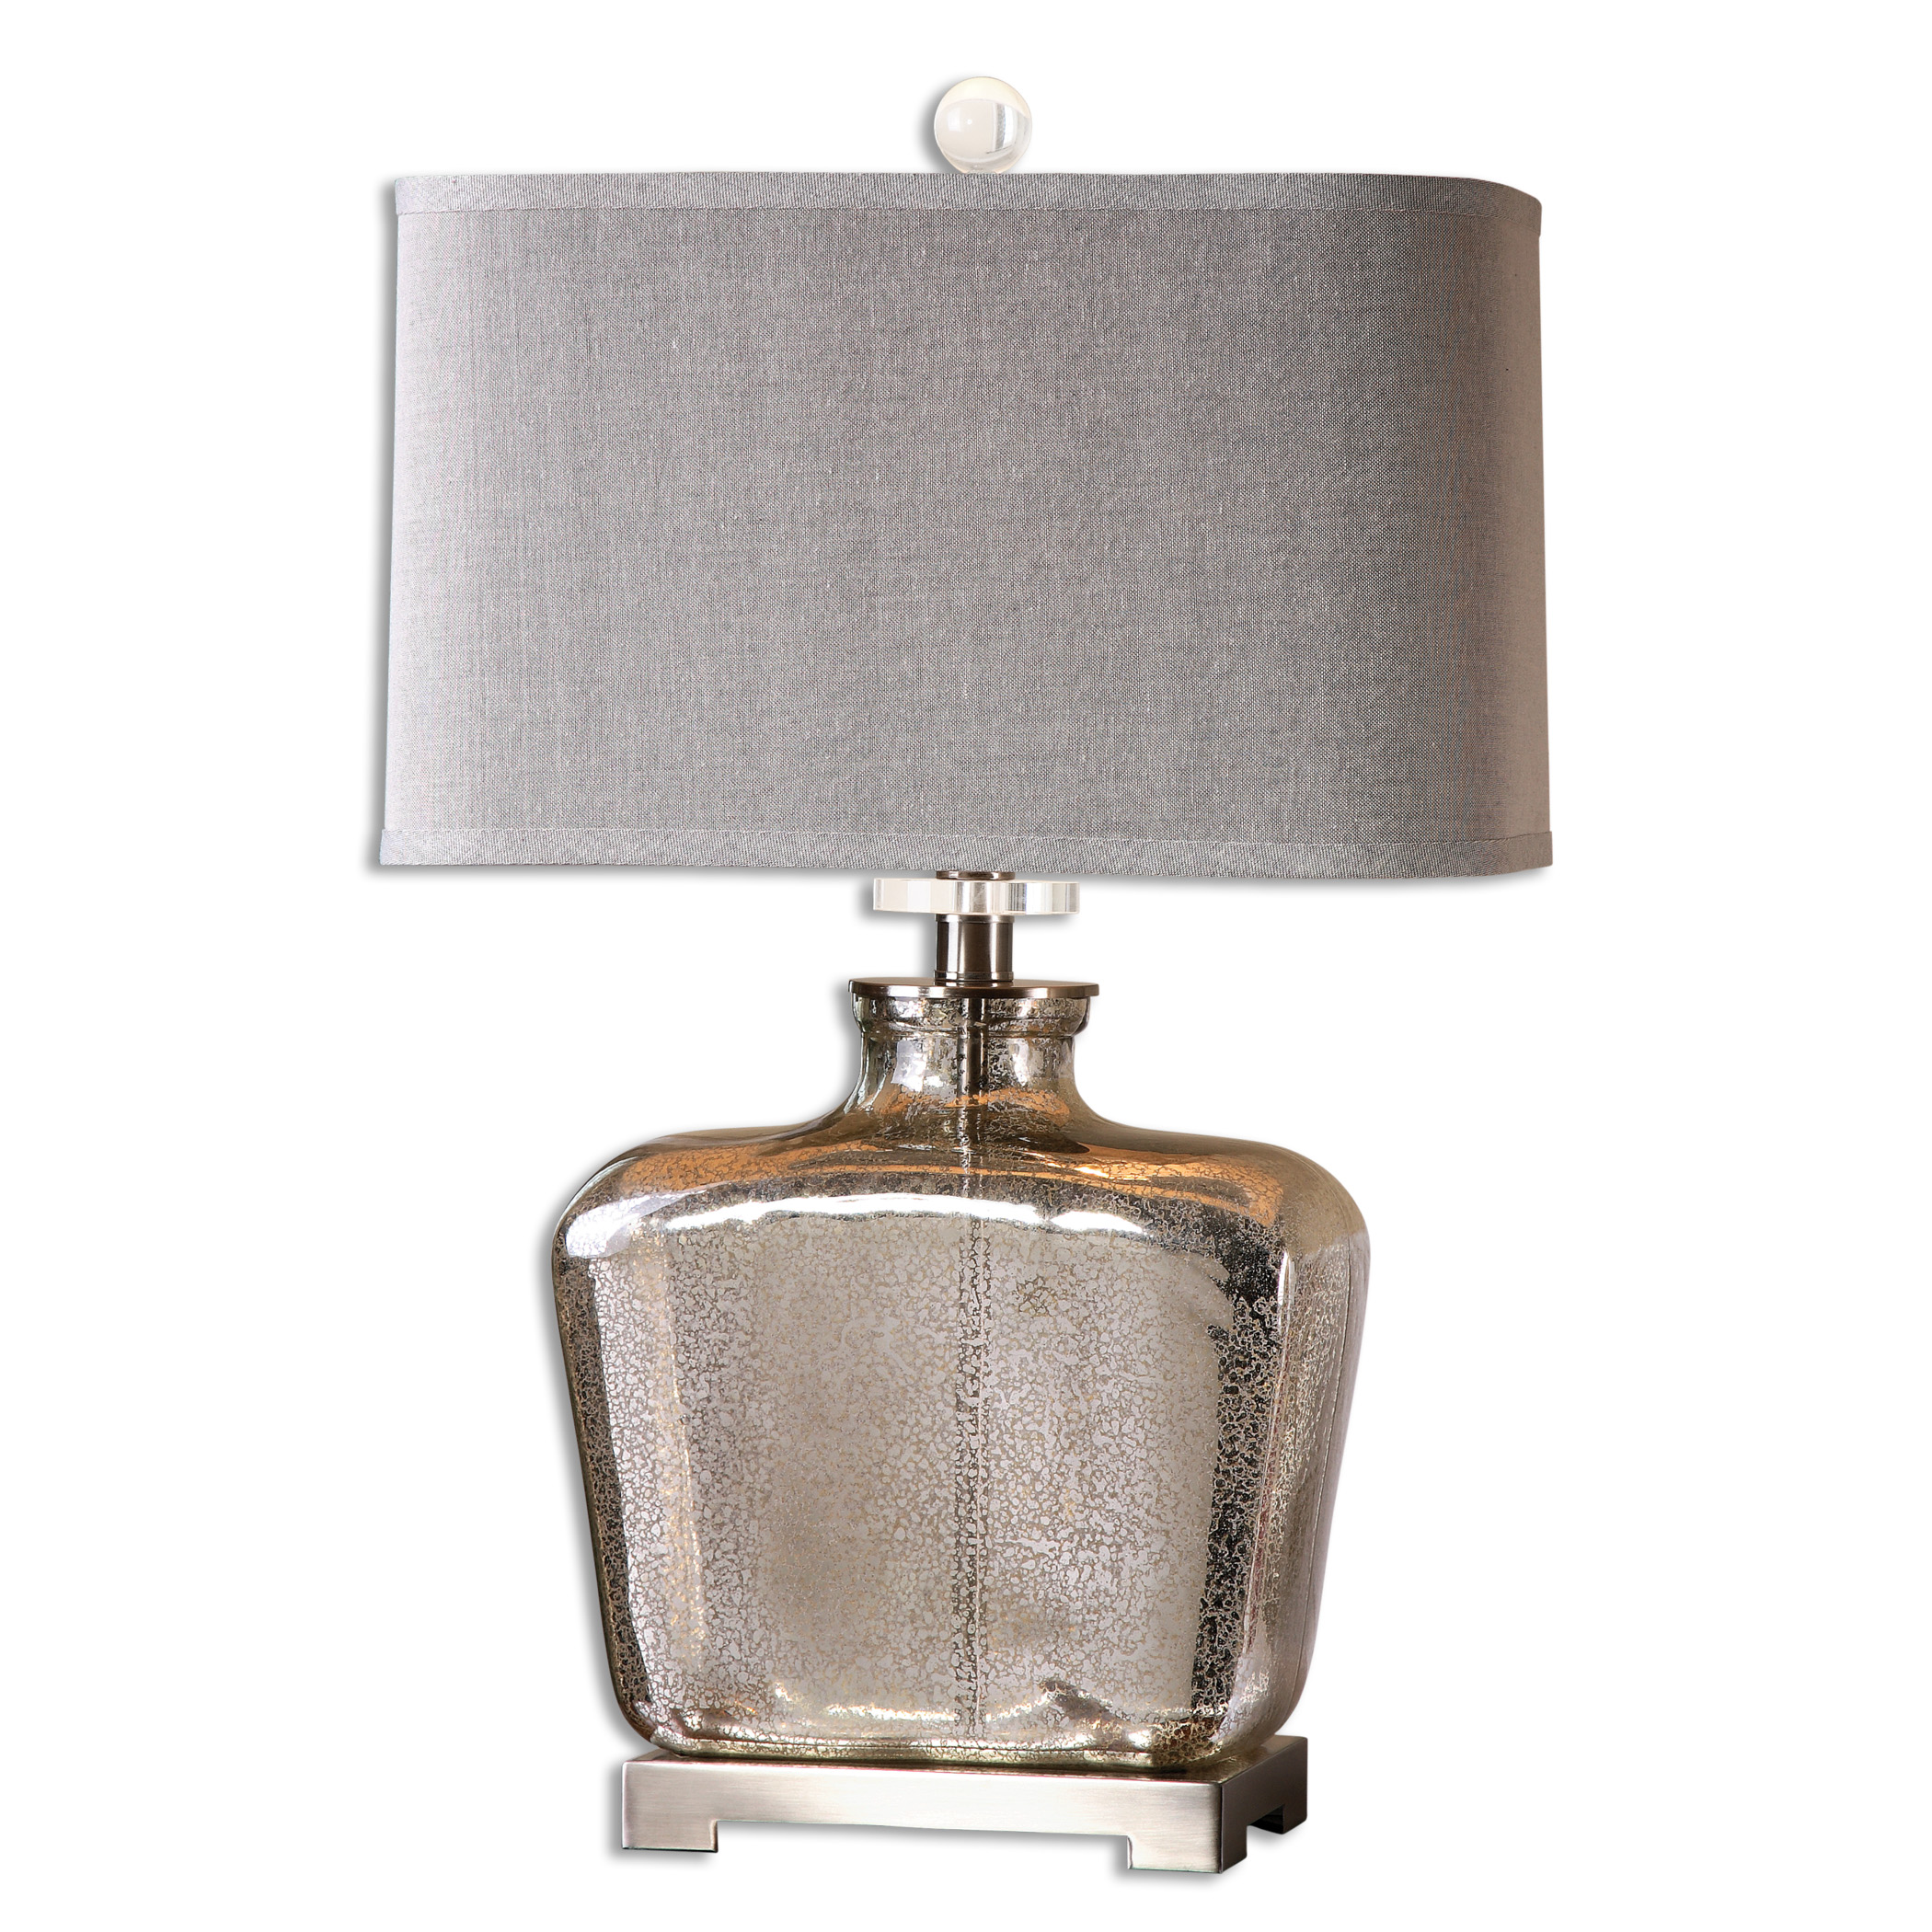 Molinara Mercury Glass Table Lamp in Silver by Uttermost